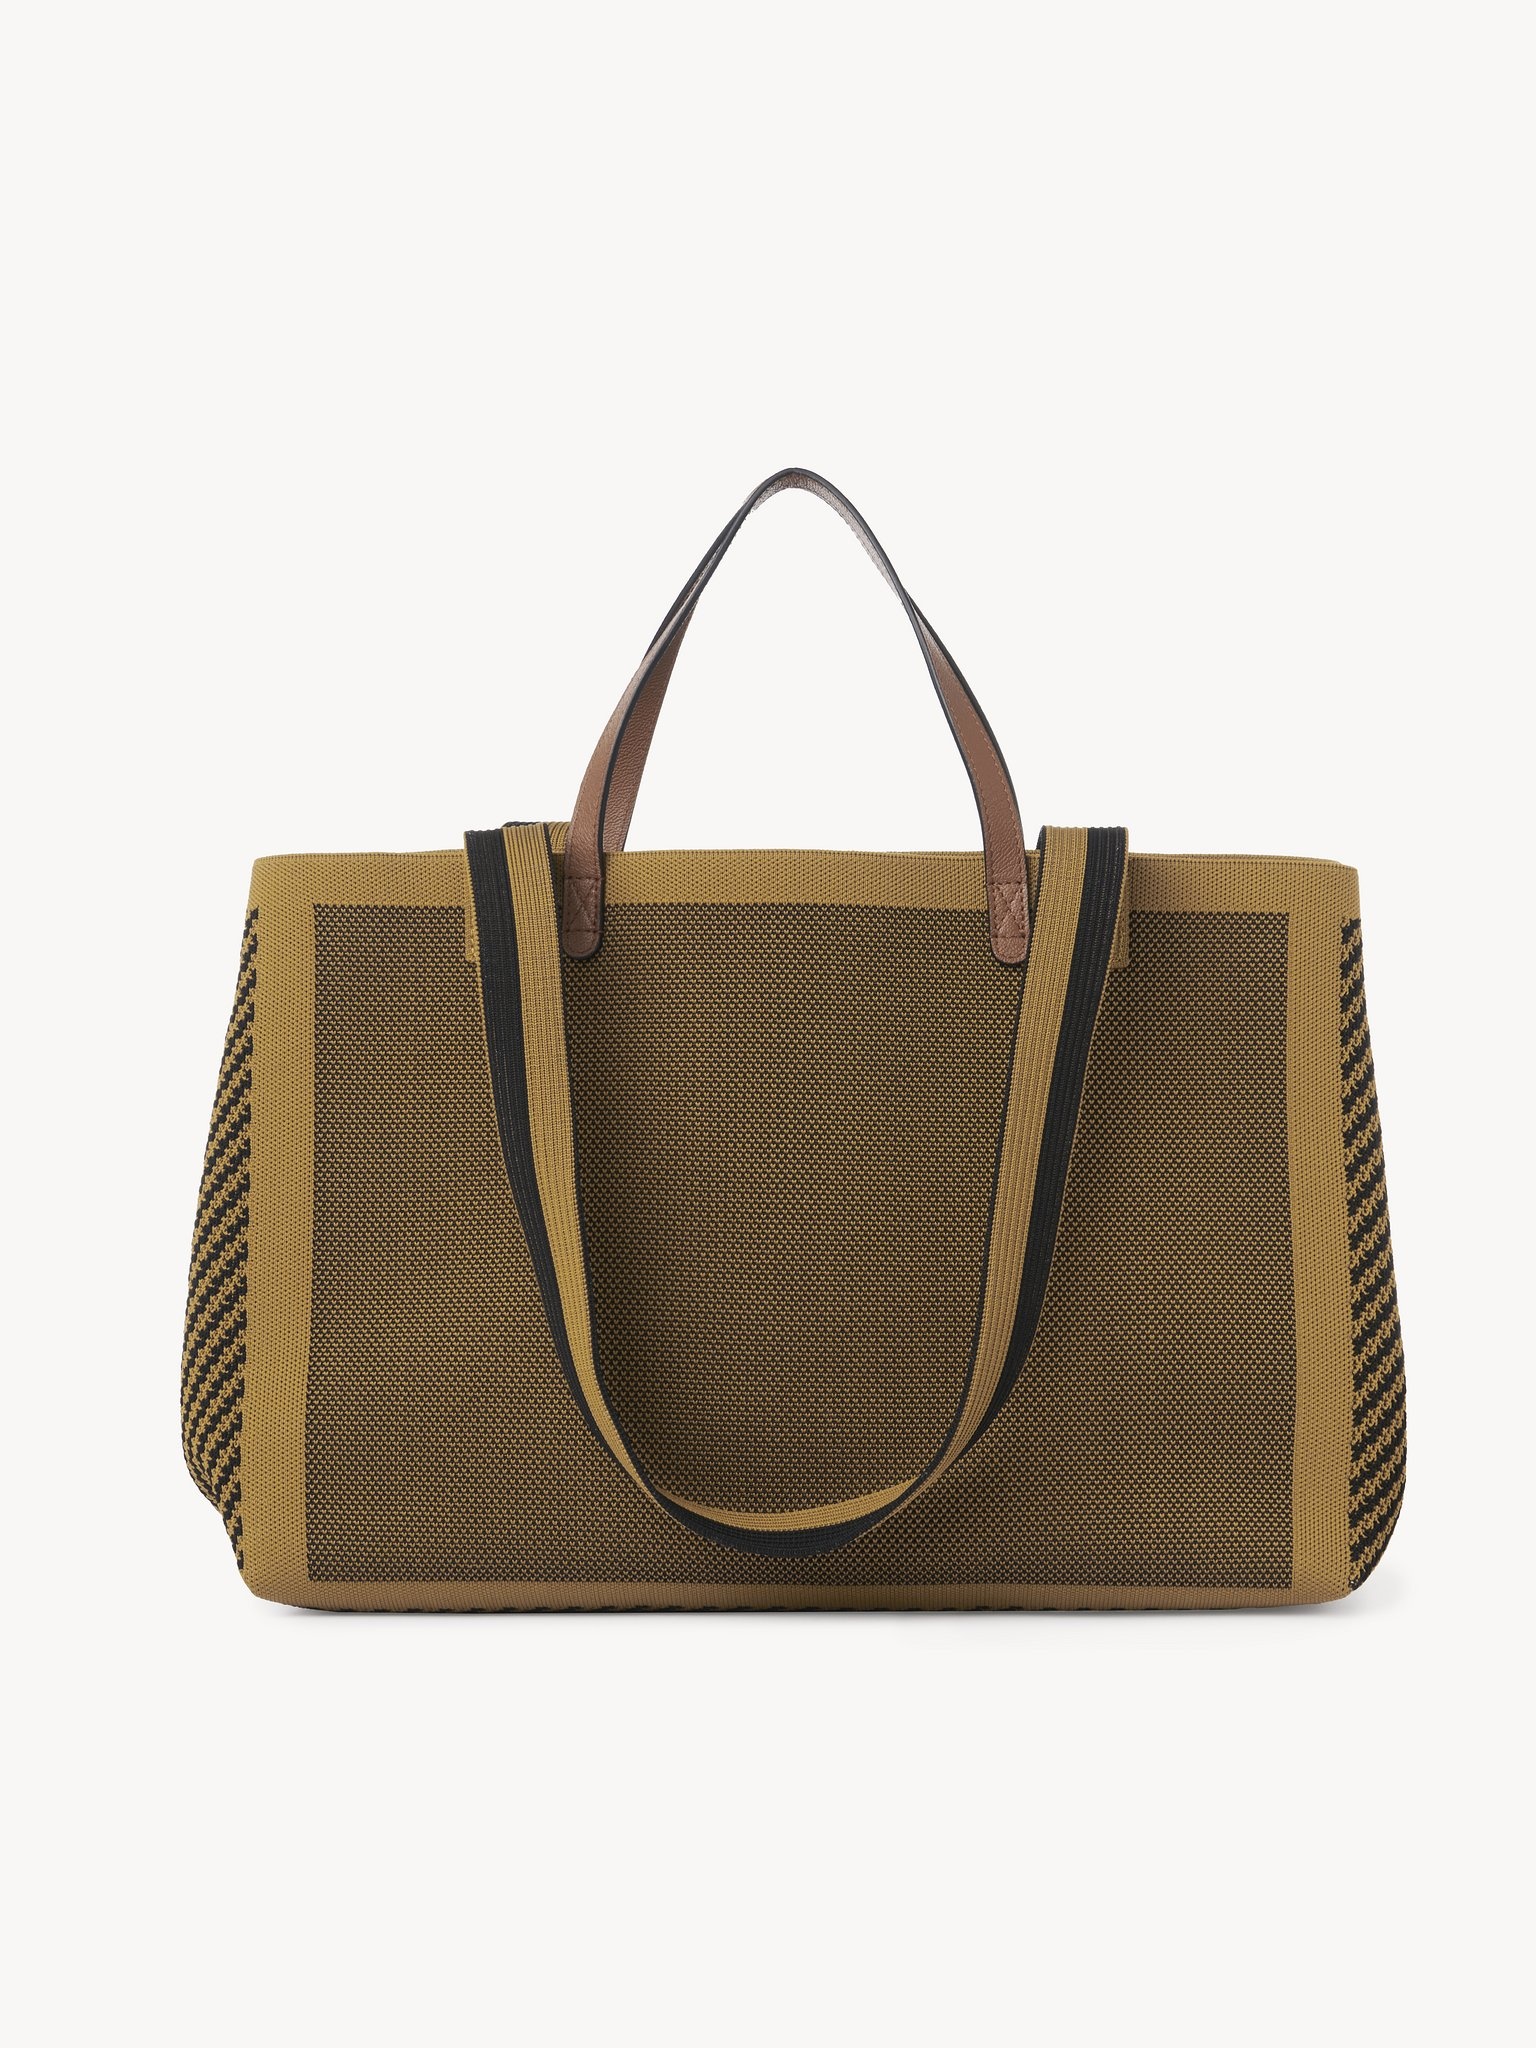 SEE BY GIRL UN JOUR TOTE - 3